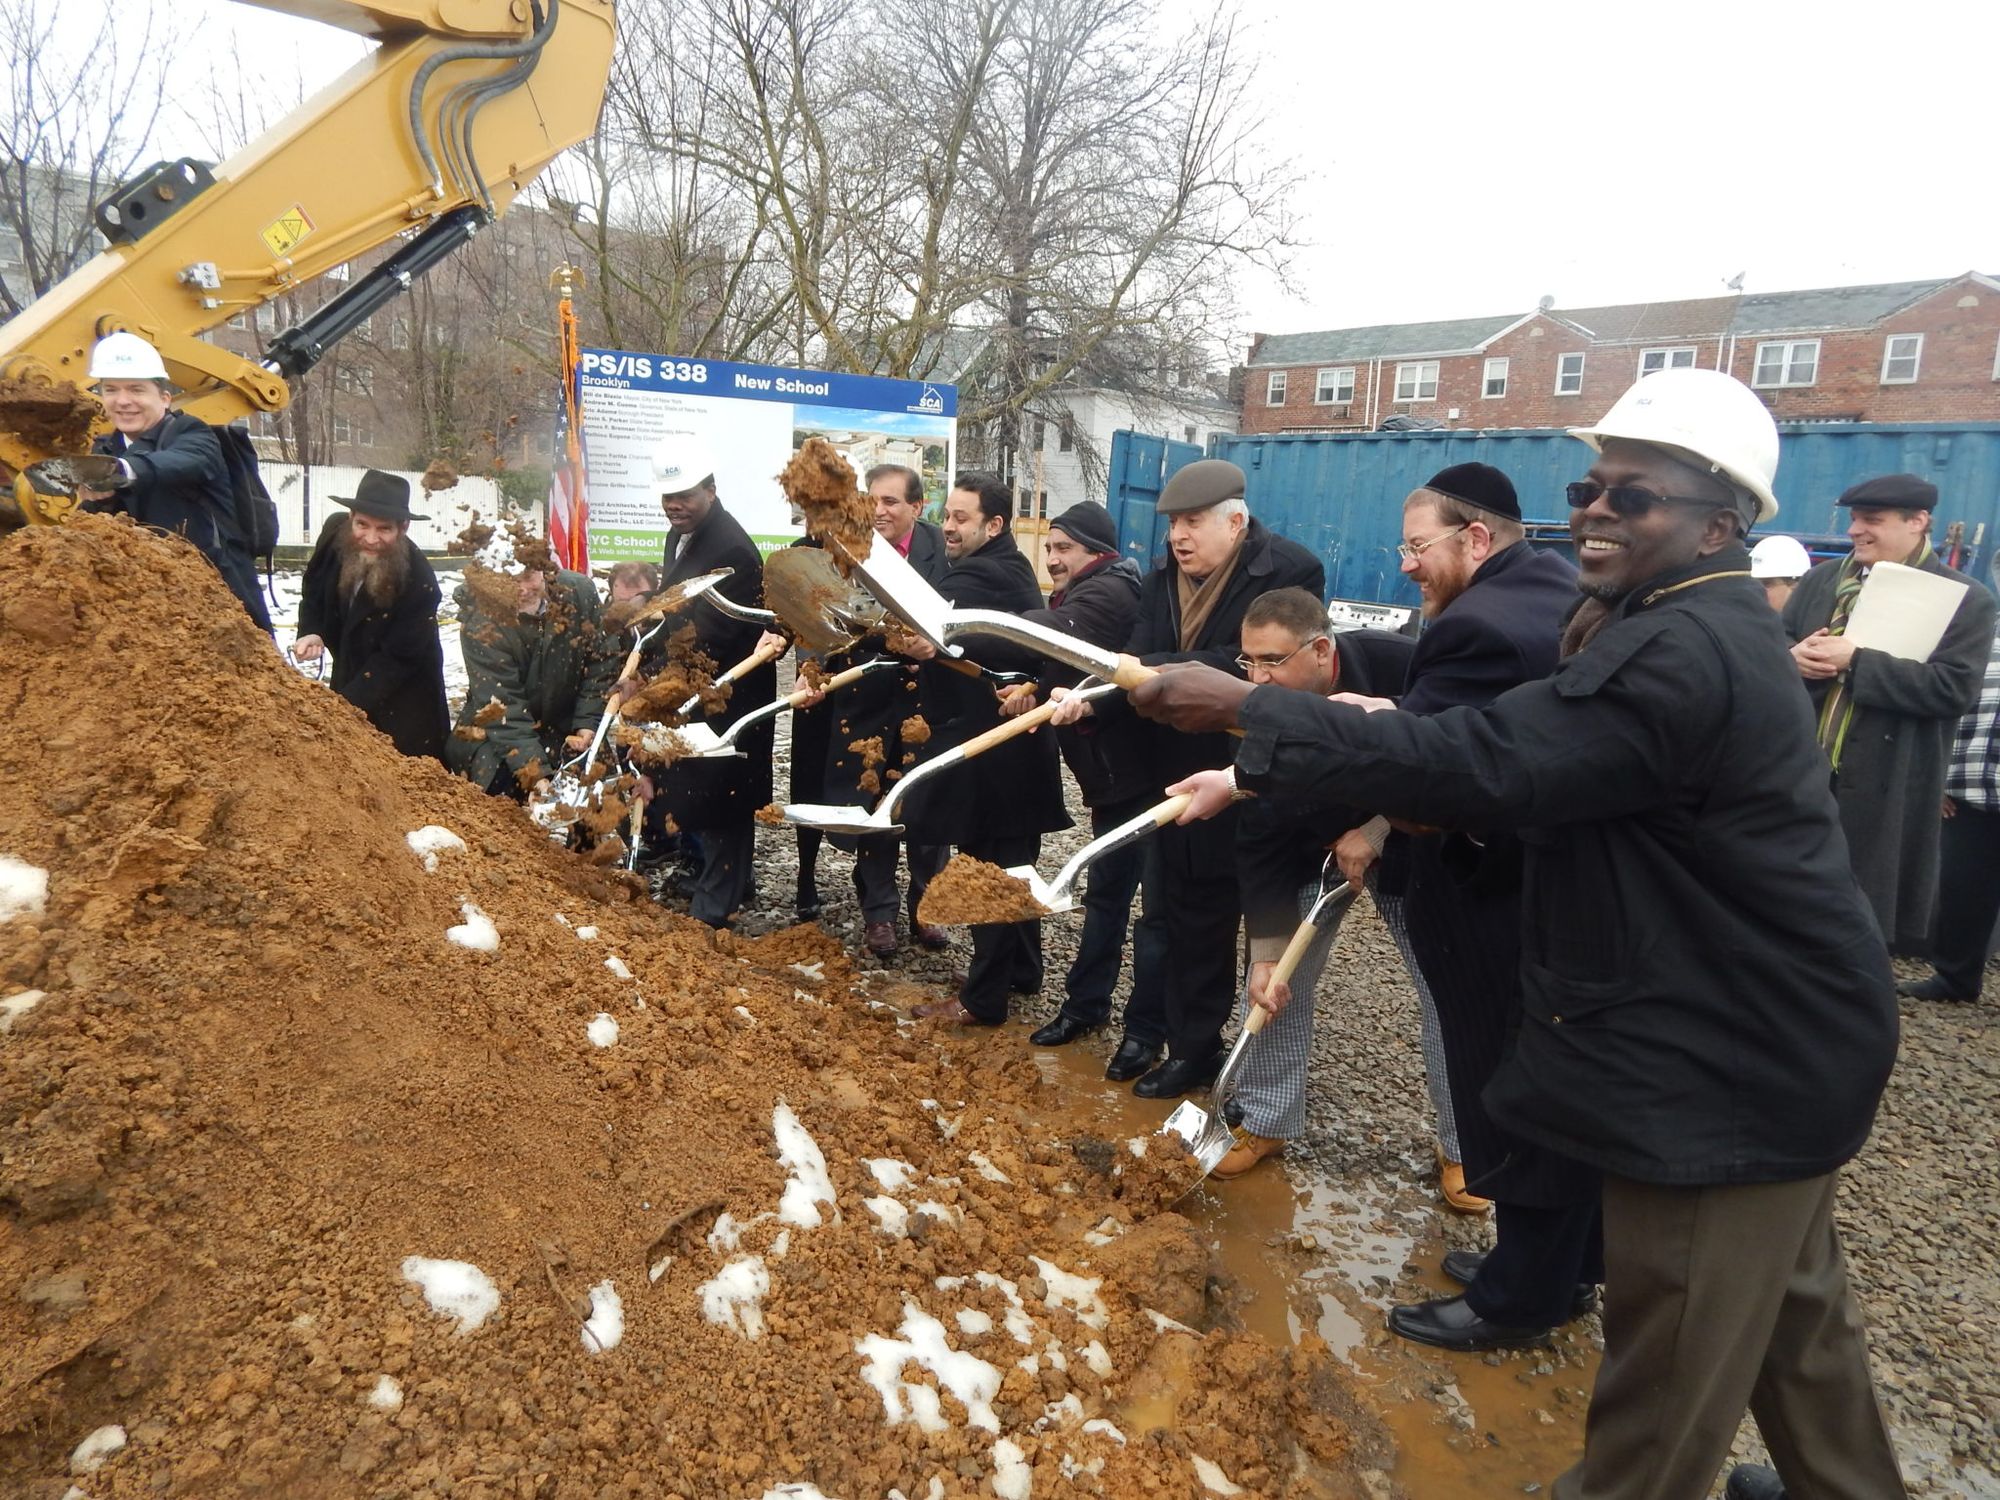 From Today’s Mud To Tomorrow’s School: Councilman Eugene & Community Leaders Break Ground On PS/IS 338